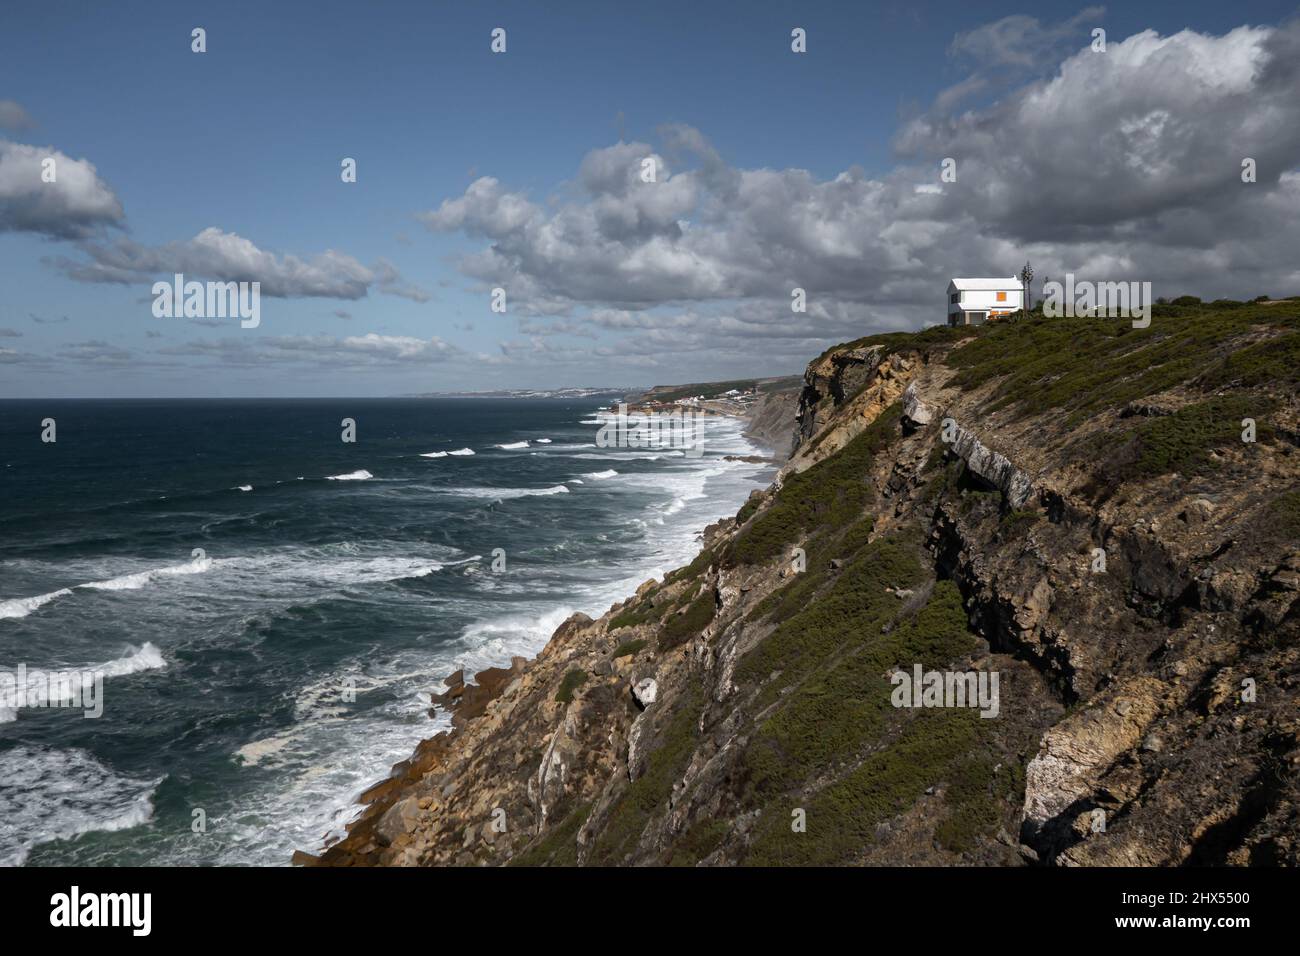 Panorama of white rendered wall summer house situated on cliff edge overlooking the Atlantic Ocean with rolling waves on Sintra coastline in Portugal Stock Photo